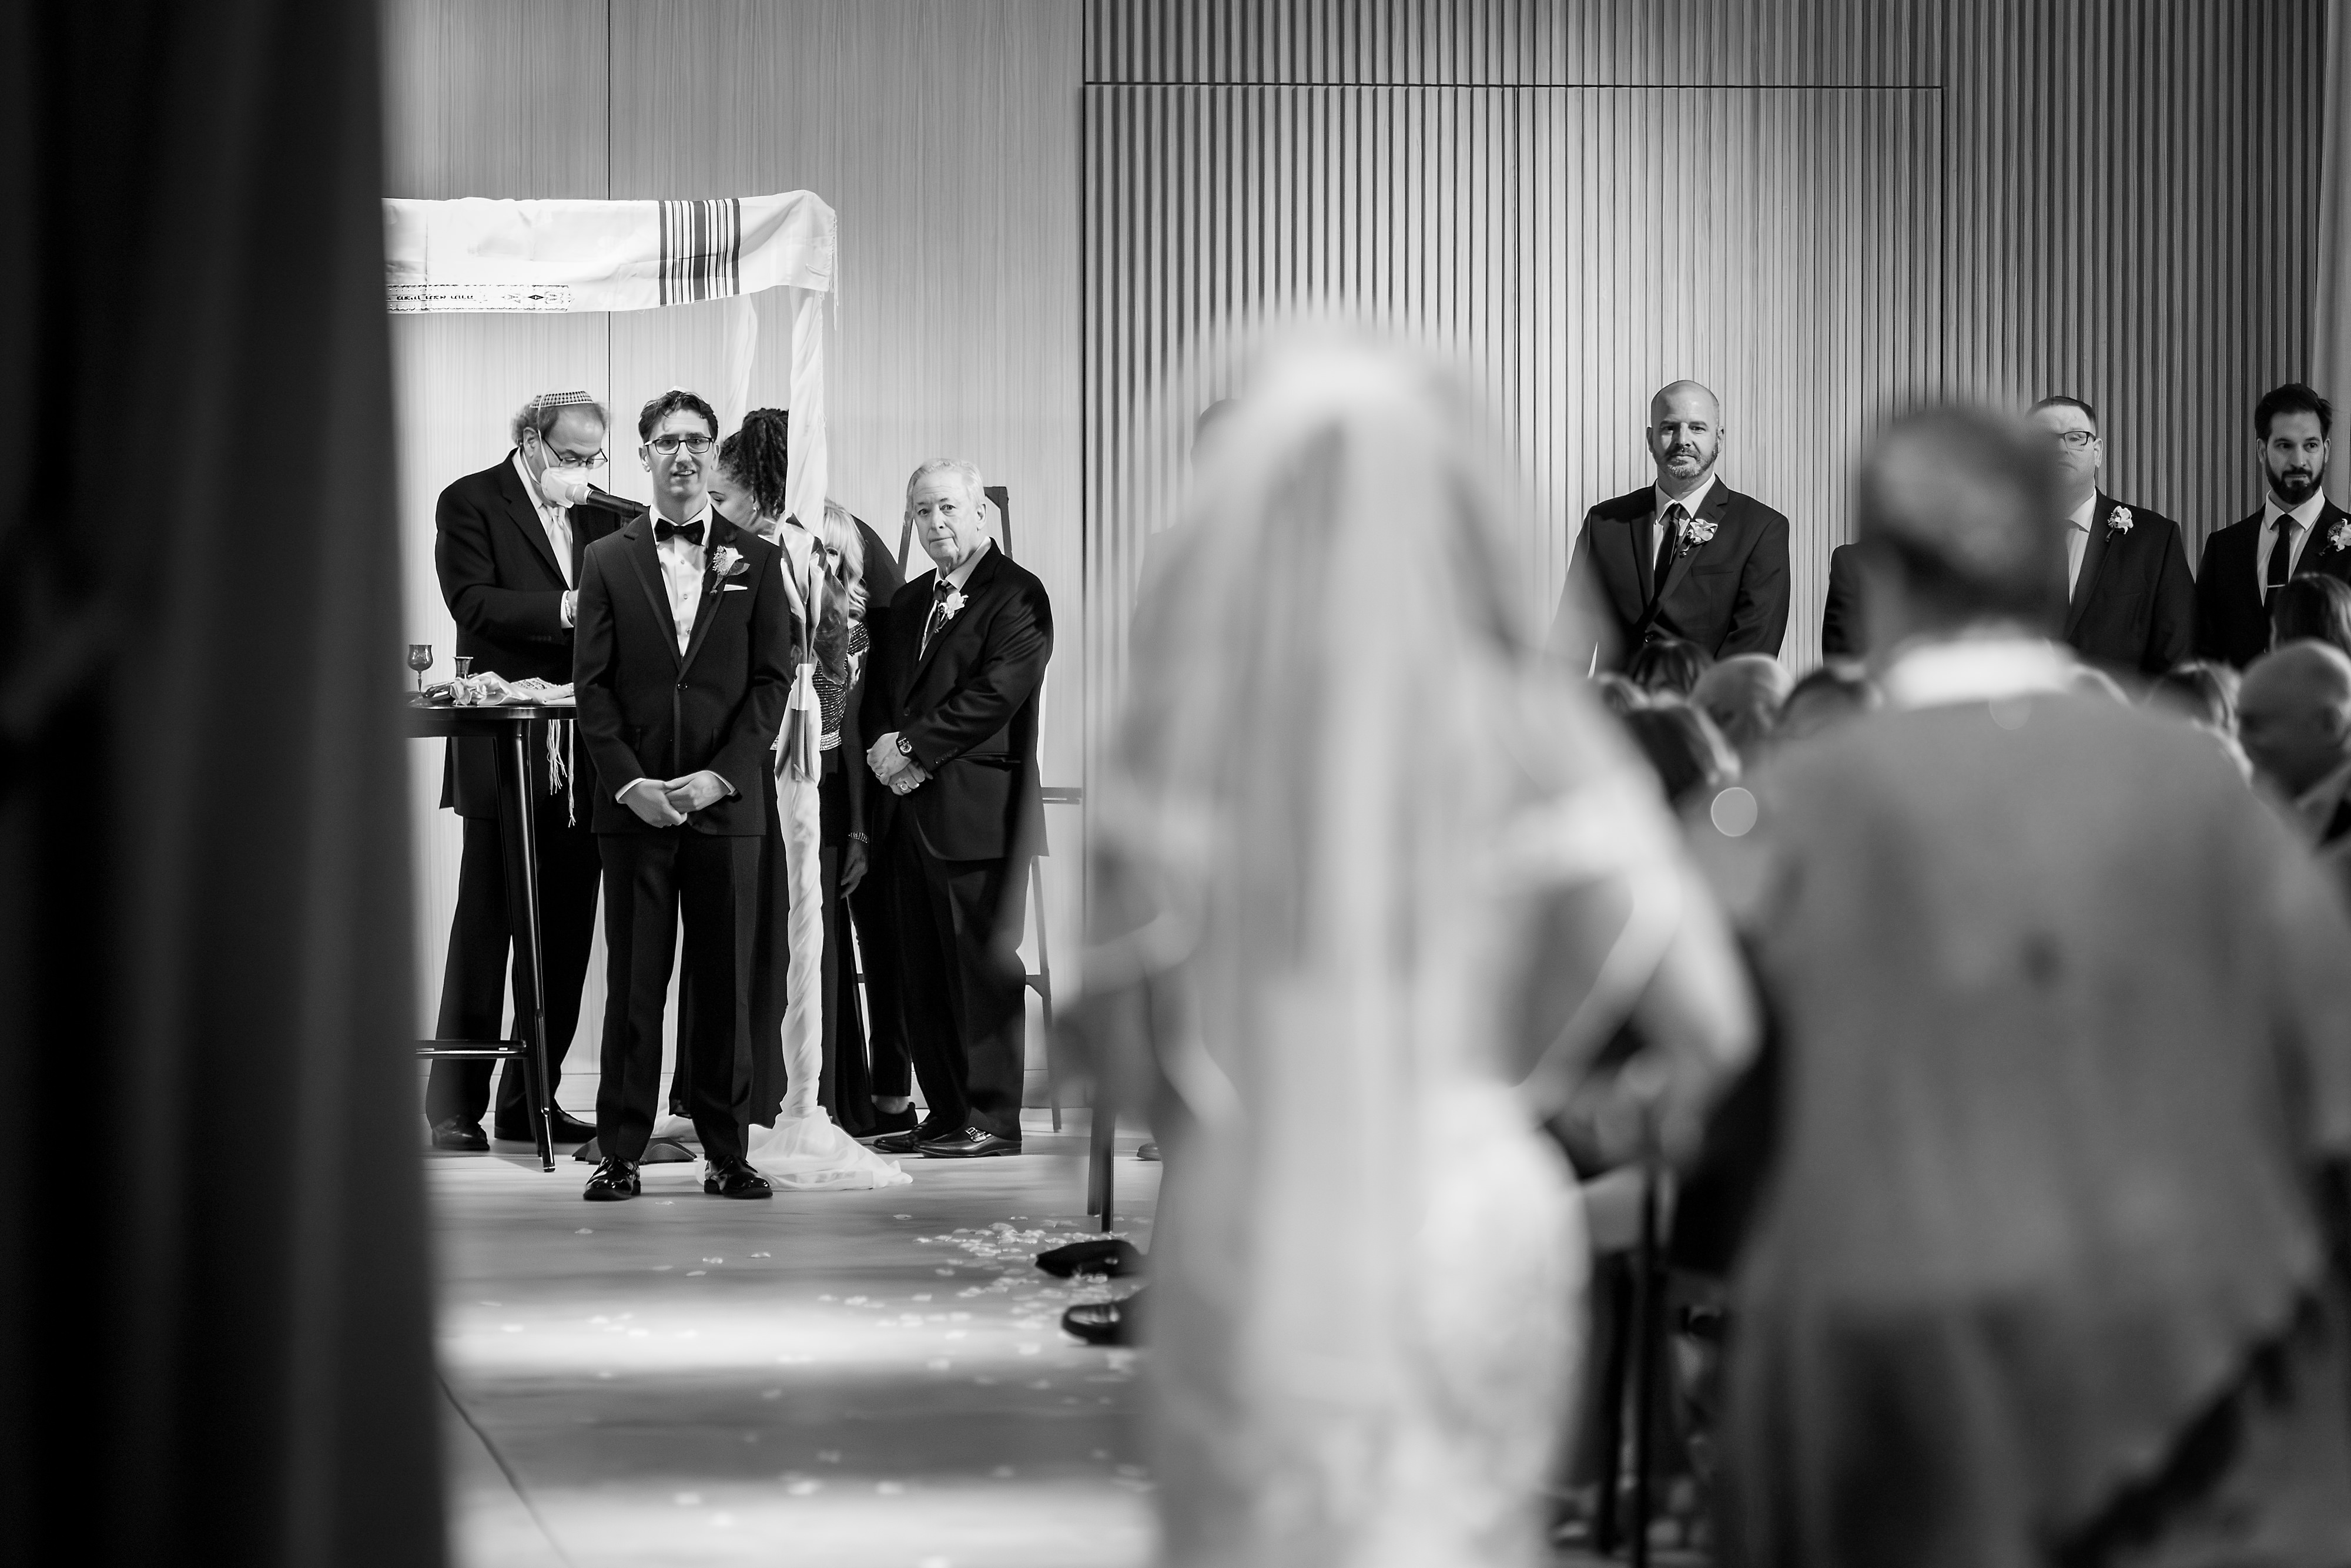 Bride walks down the aisle with groom watching during wedding ceremony at Sarabande in Chicago